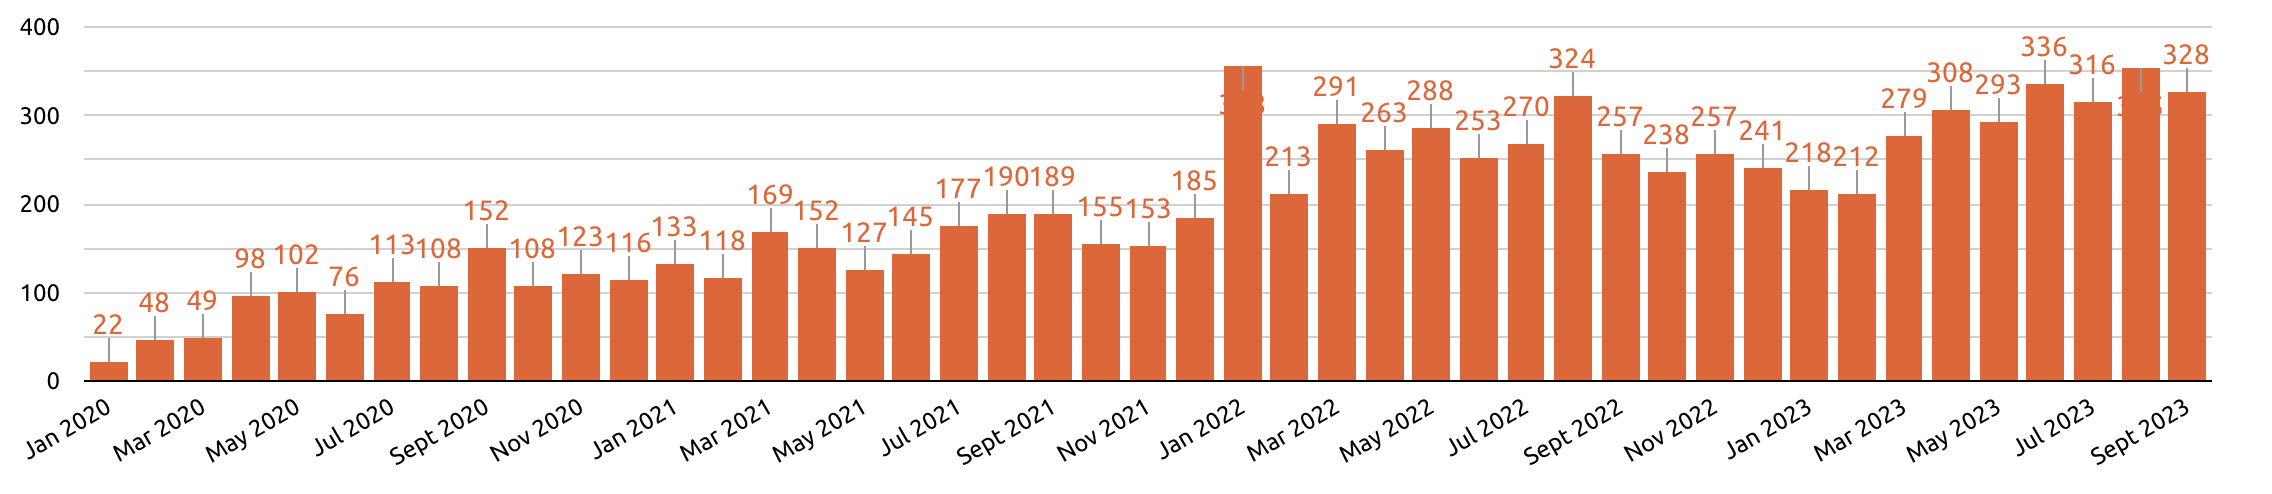 graph showing amount of evaluated articles added to Sciety per month